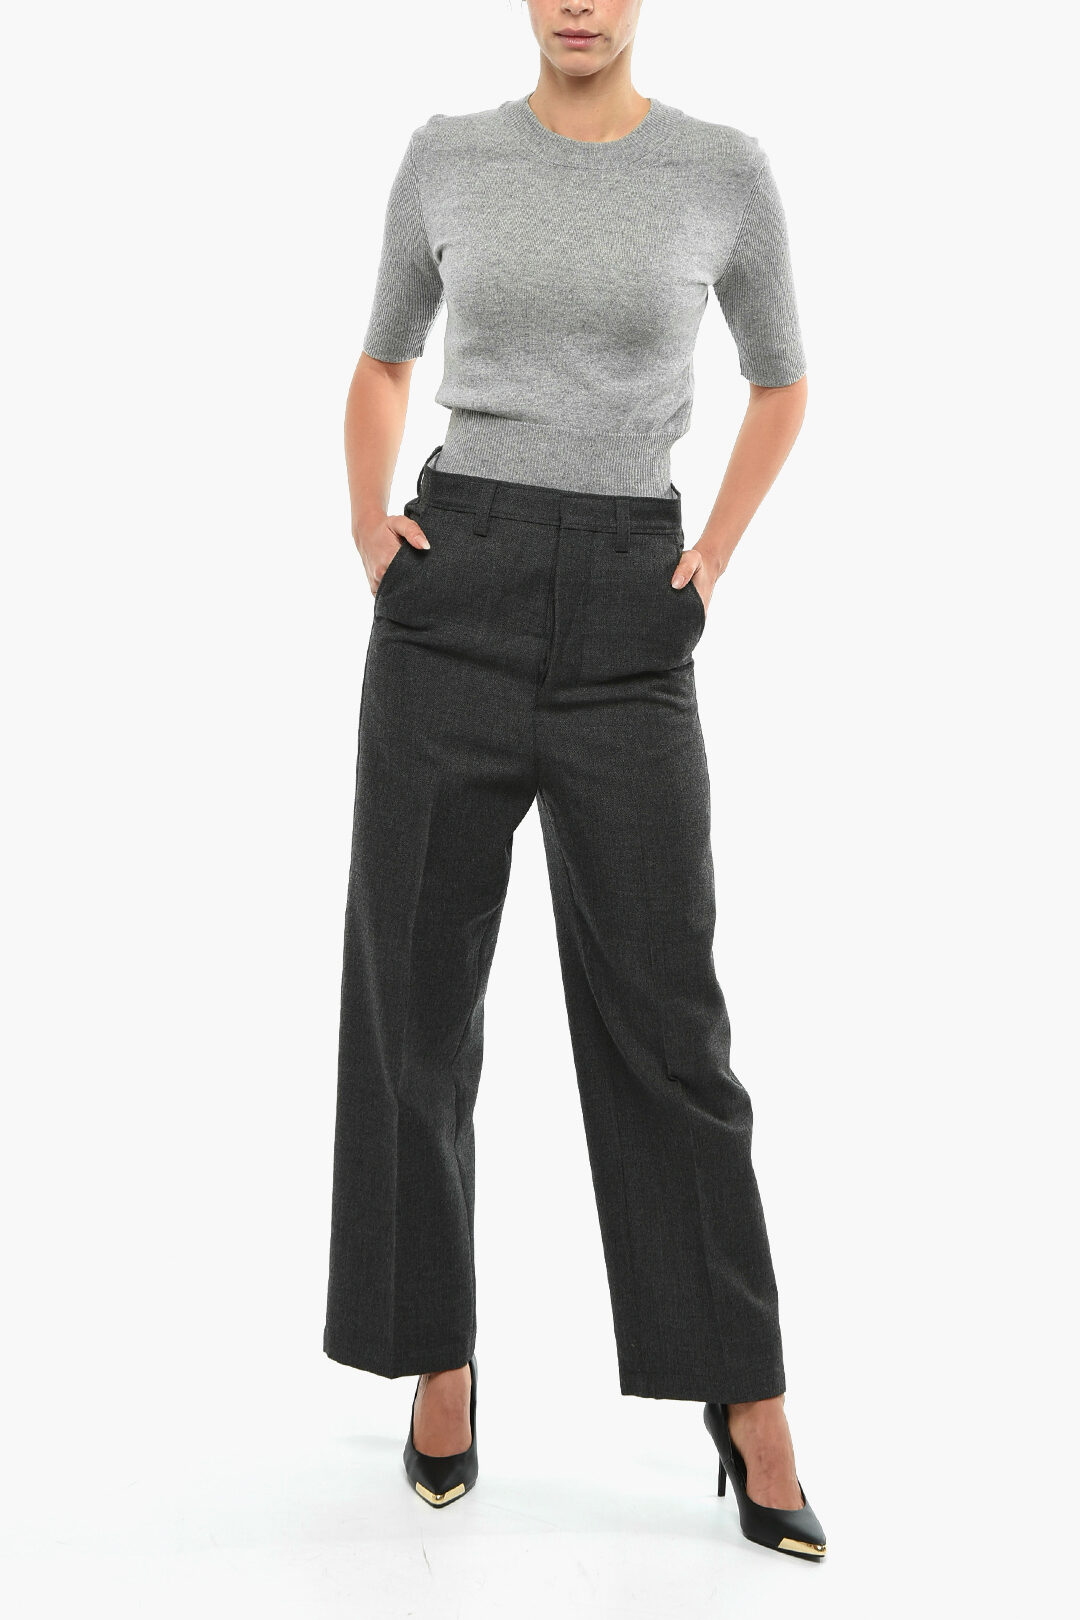 Ami Alexandre Mattiussi 4 Pockets Wide Leg Tailored Pants with Belt Loops  women - Glamood Outlet